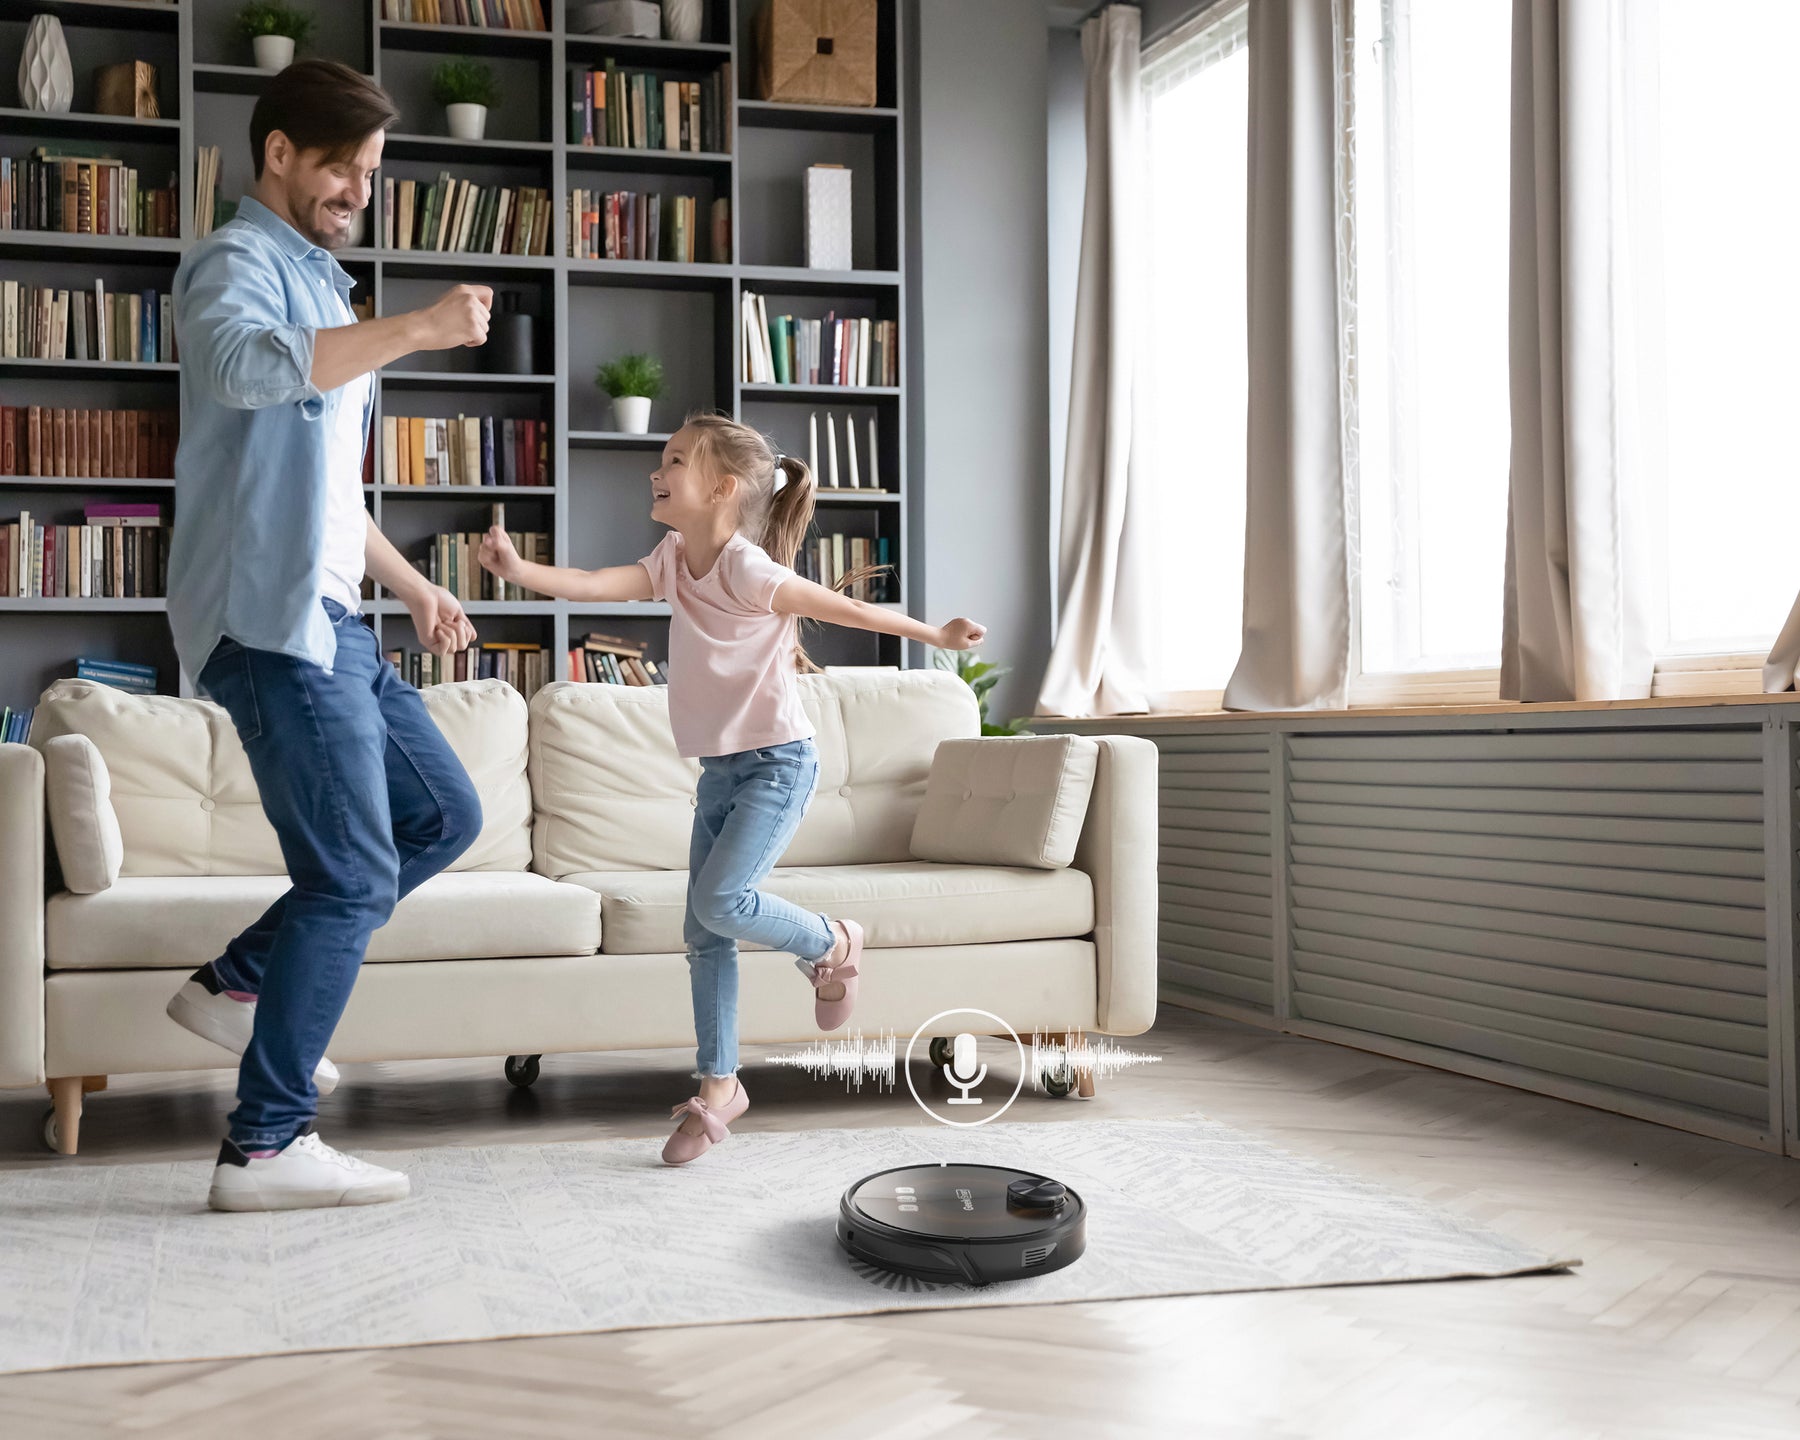 Geek Smart L8 Robot Vacuum Cleaner and Mop, LDS Navigation, Wi-Fi Connected APP, Selective Room Cleaning,MAX 2700 PA Suction, Ideal for Pets and Larger Home(Ban on Amazon) - Tonkn